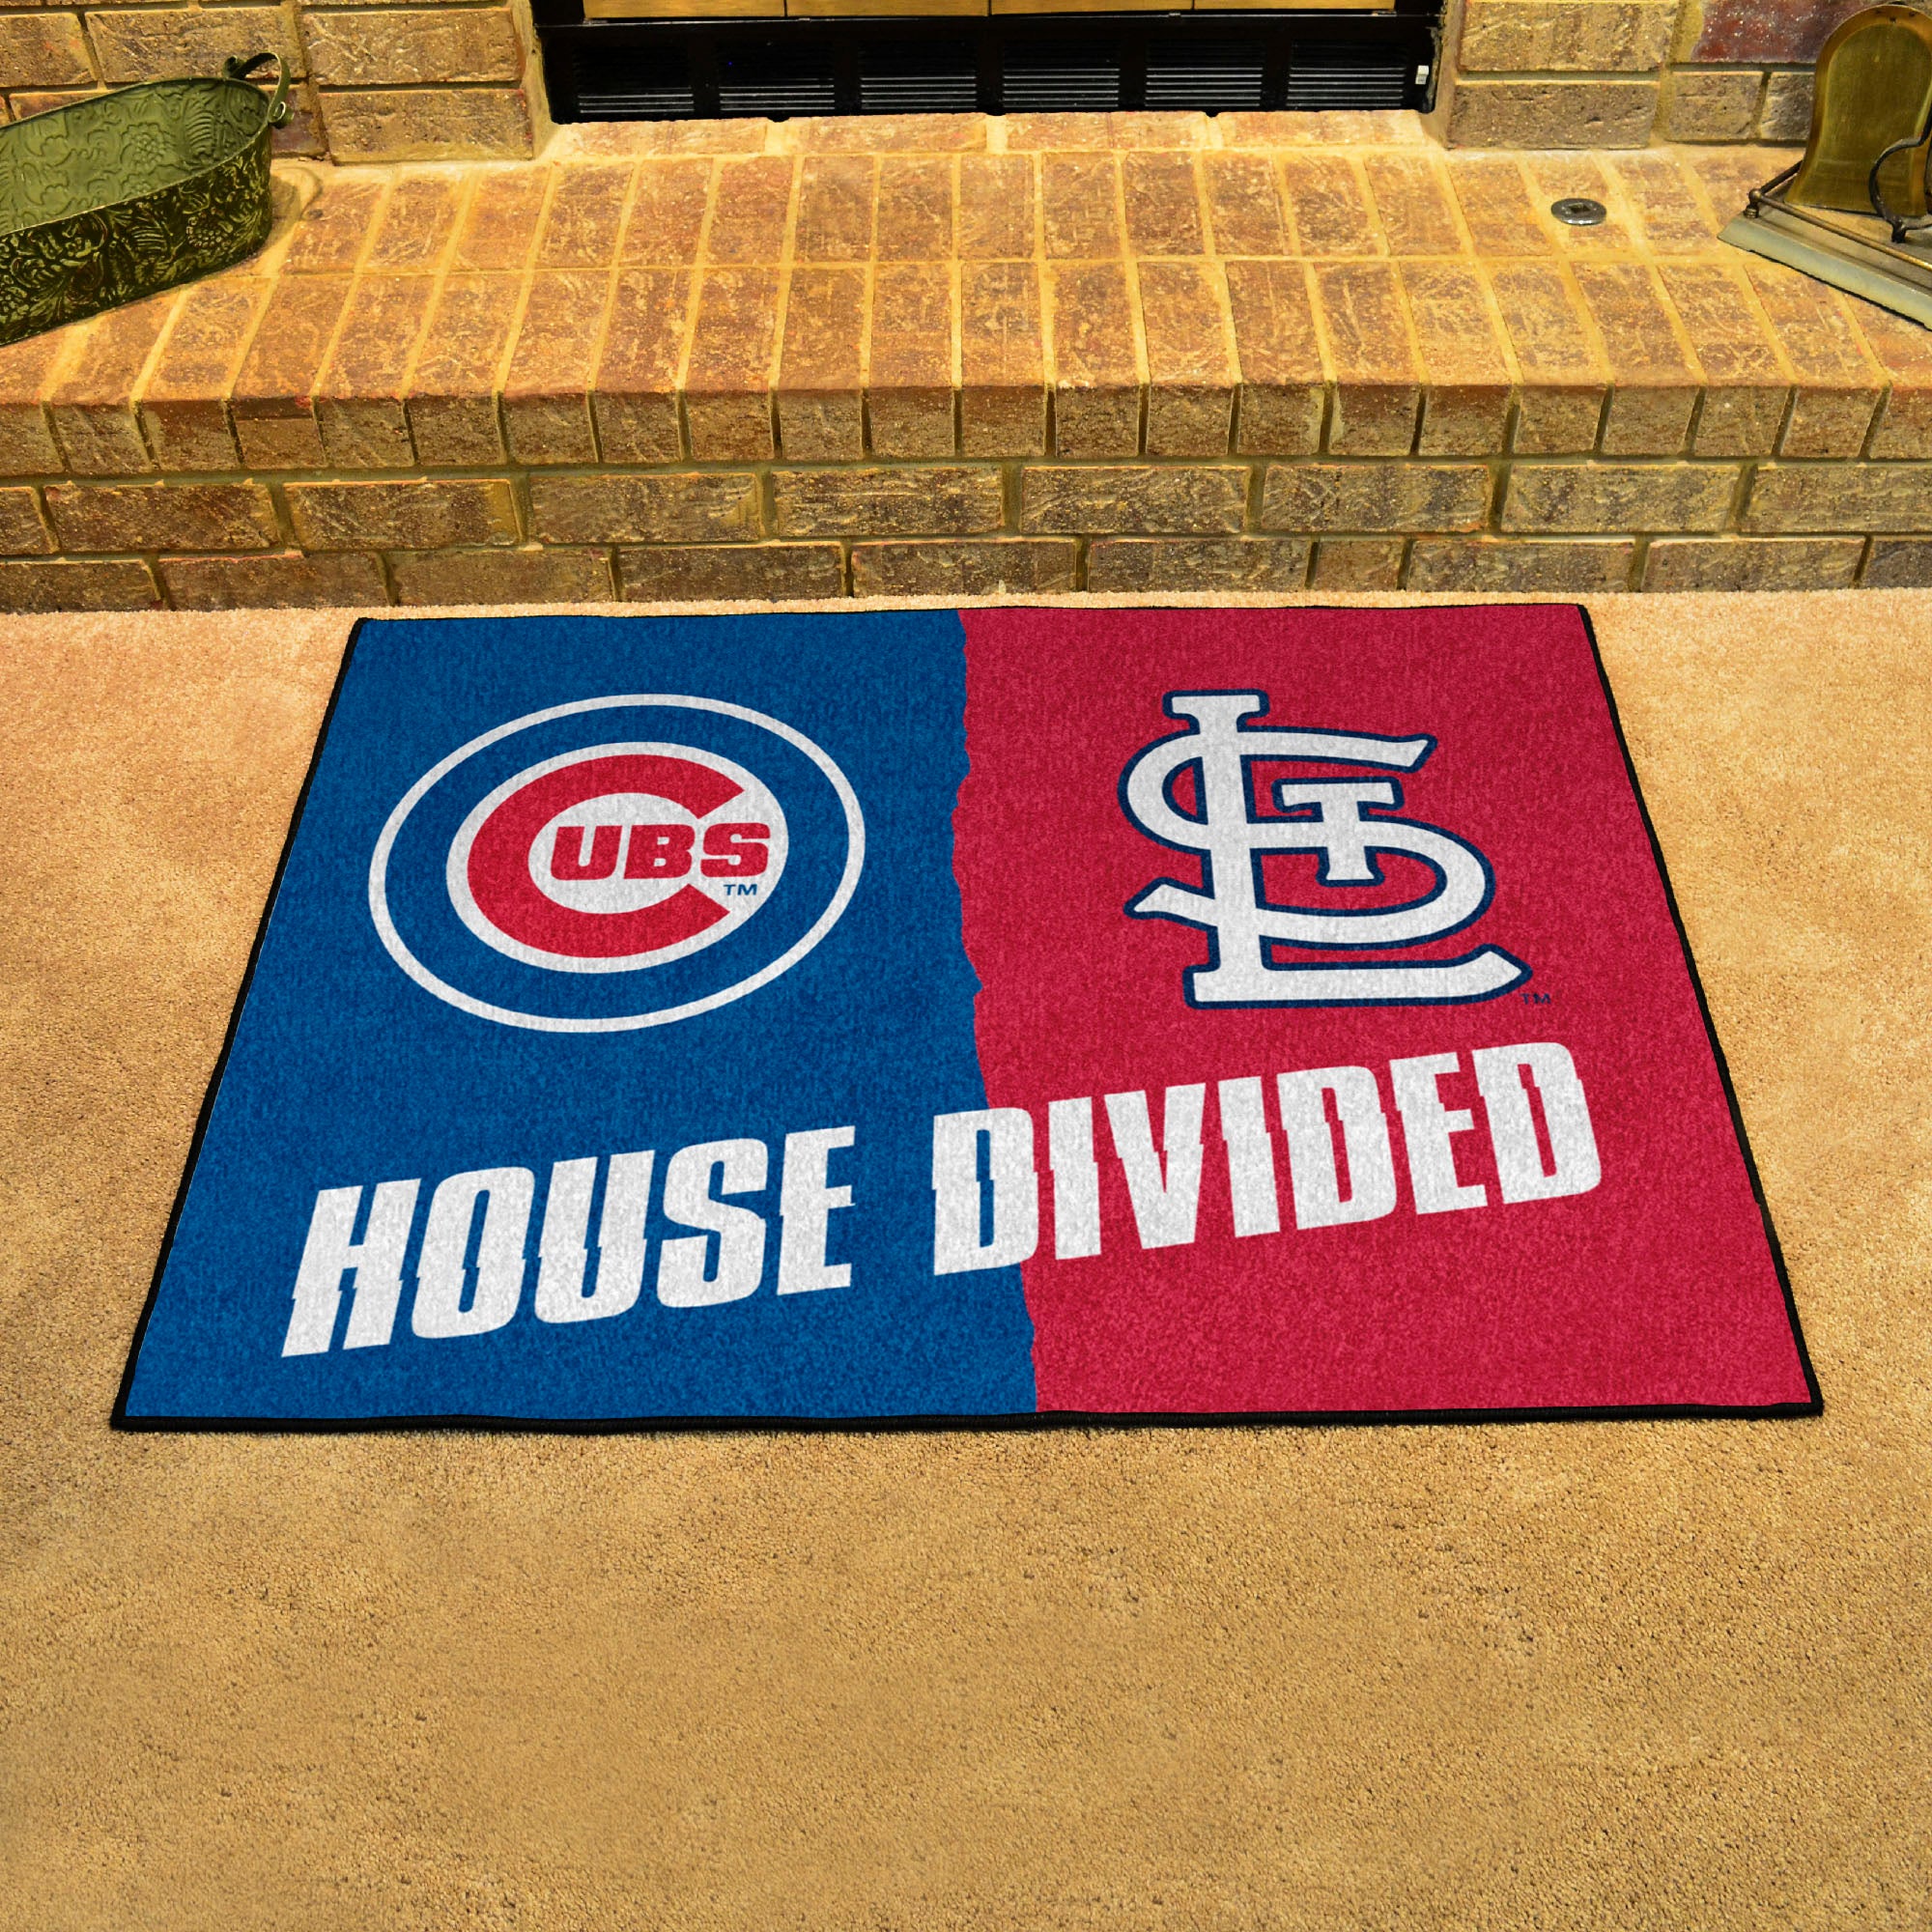 FANMATS, MLB House Divided - Cubs / Cardinals House Divided Rug